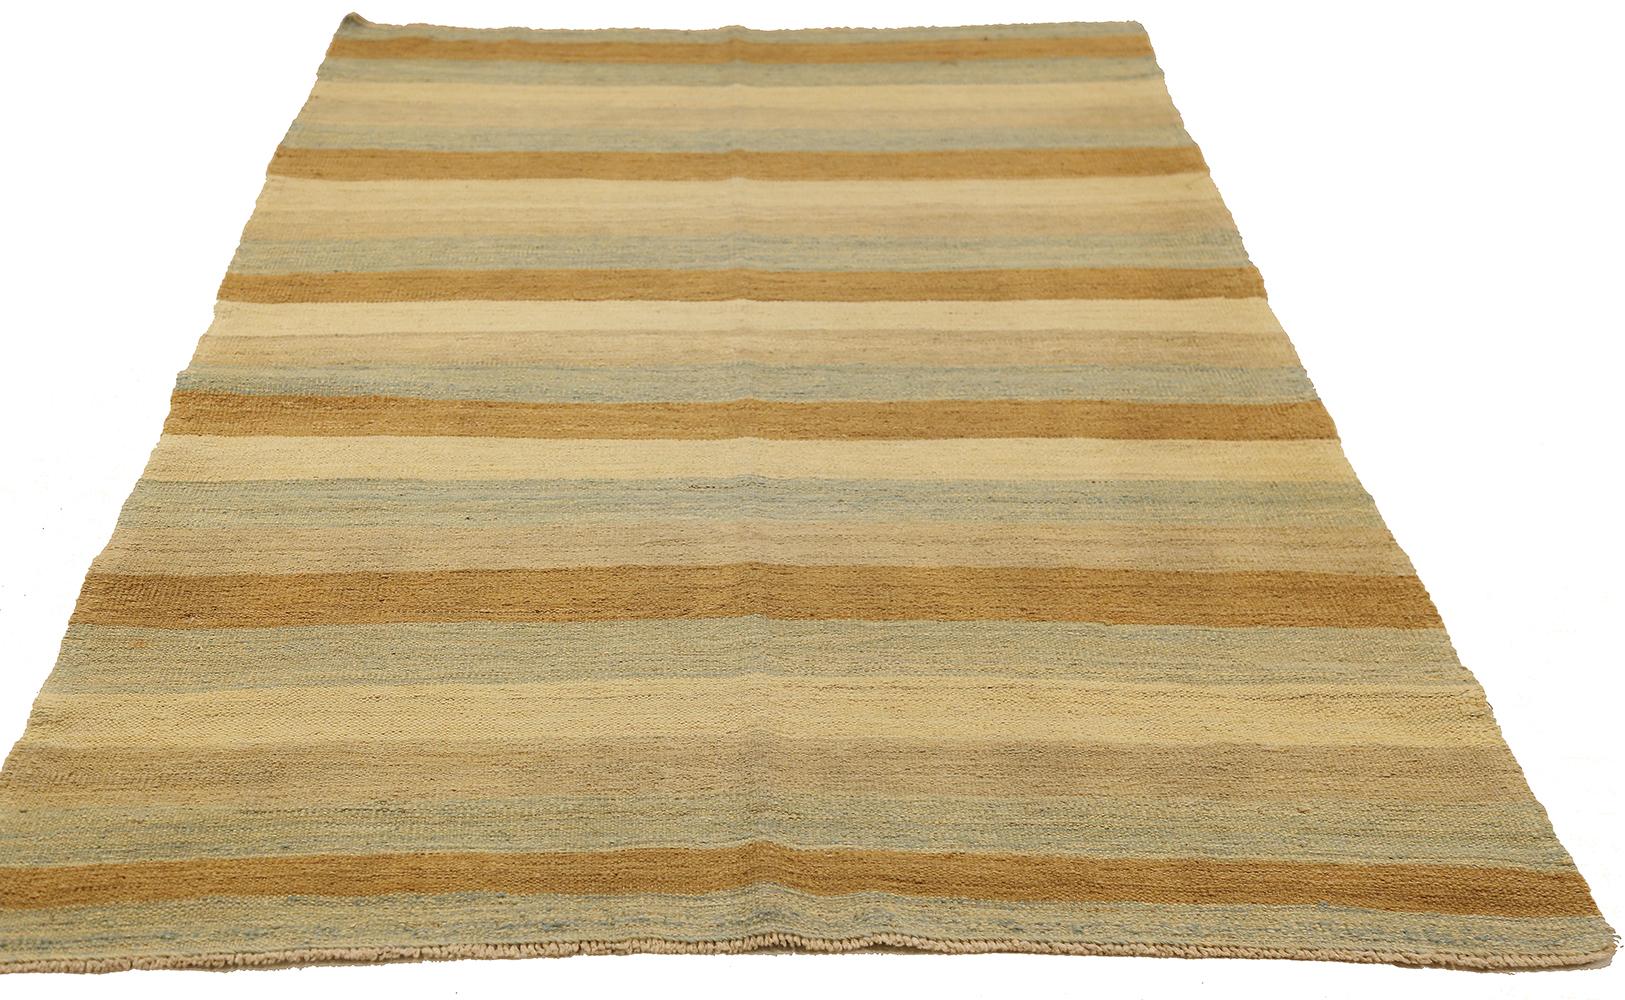 Persian rug handwoven from the finest sheep’s wool and colored with all-natural vegetable dyes that are safe for humans and pets. It’s a Kilim style flat-weave design featuring stripes in blue and brown over an ivory field. It’s a stunning piece to